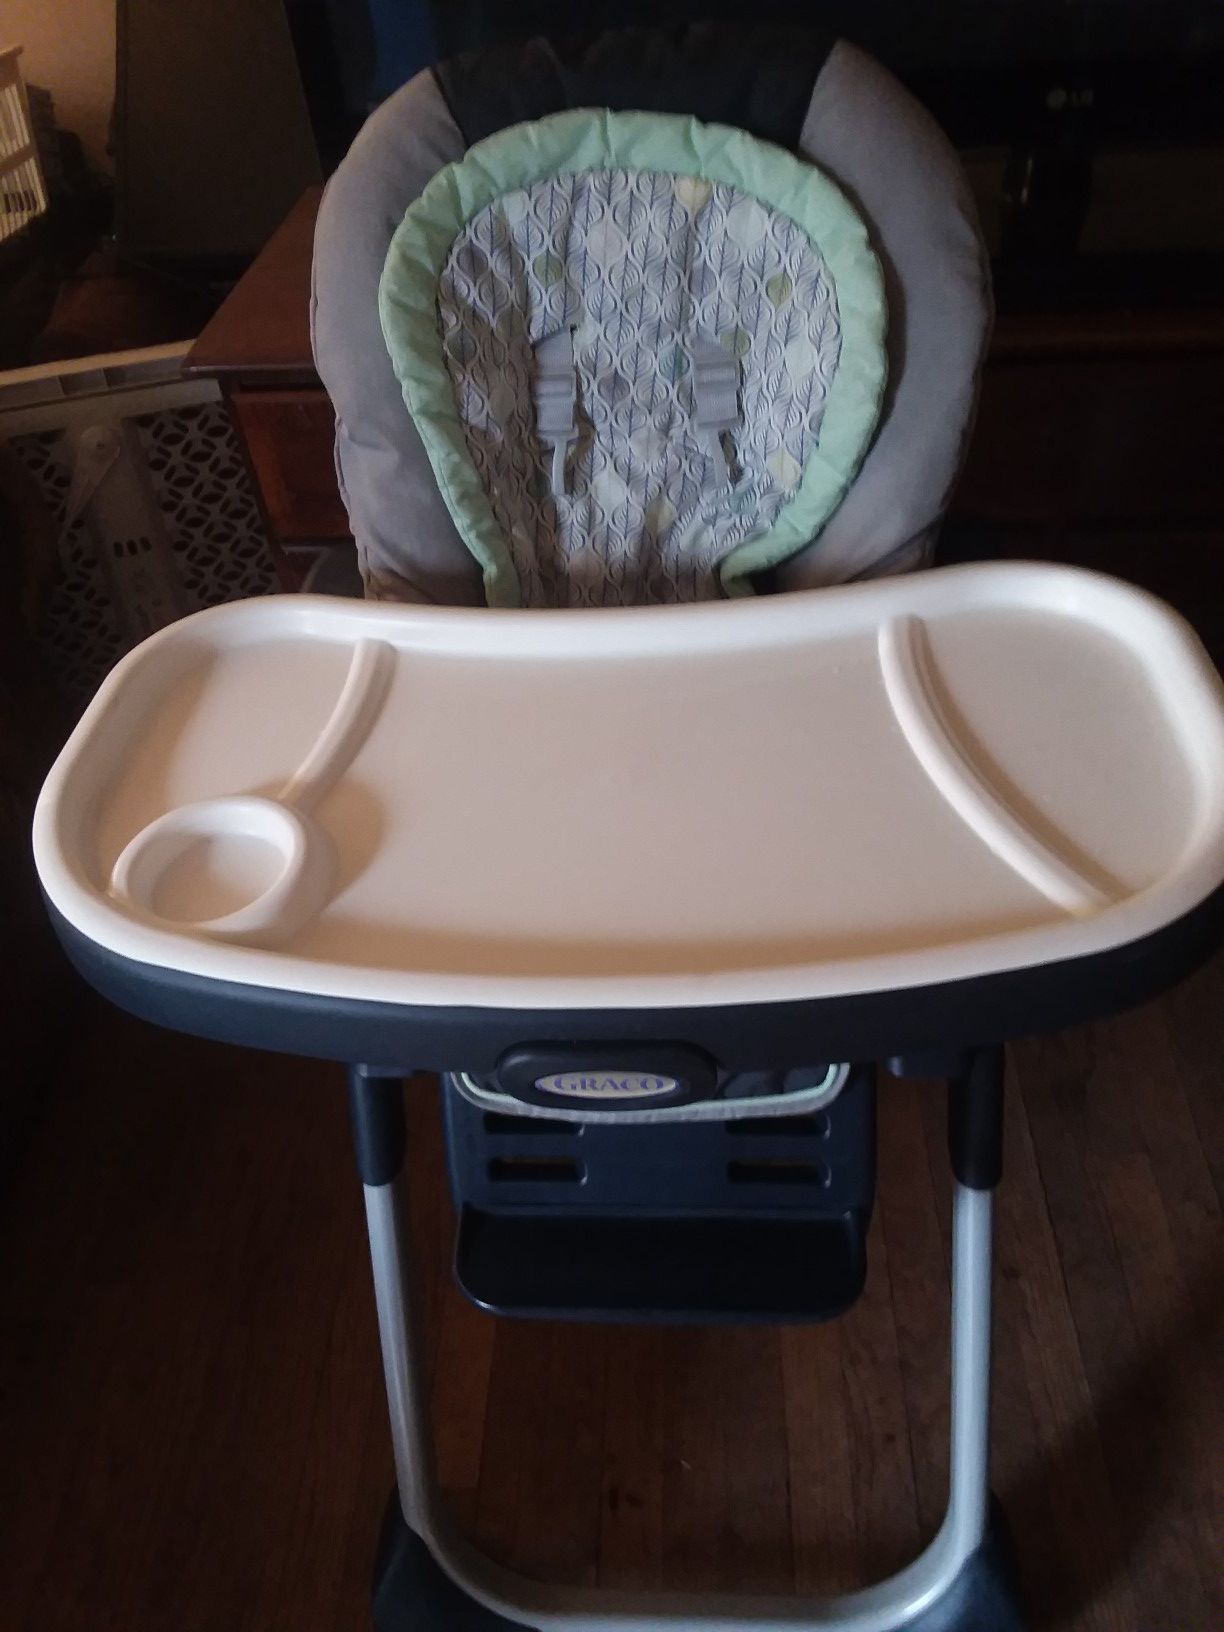 Graco highchair/booster seat